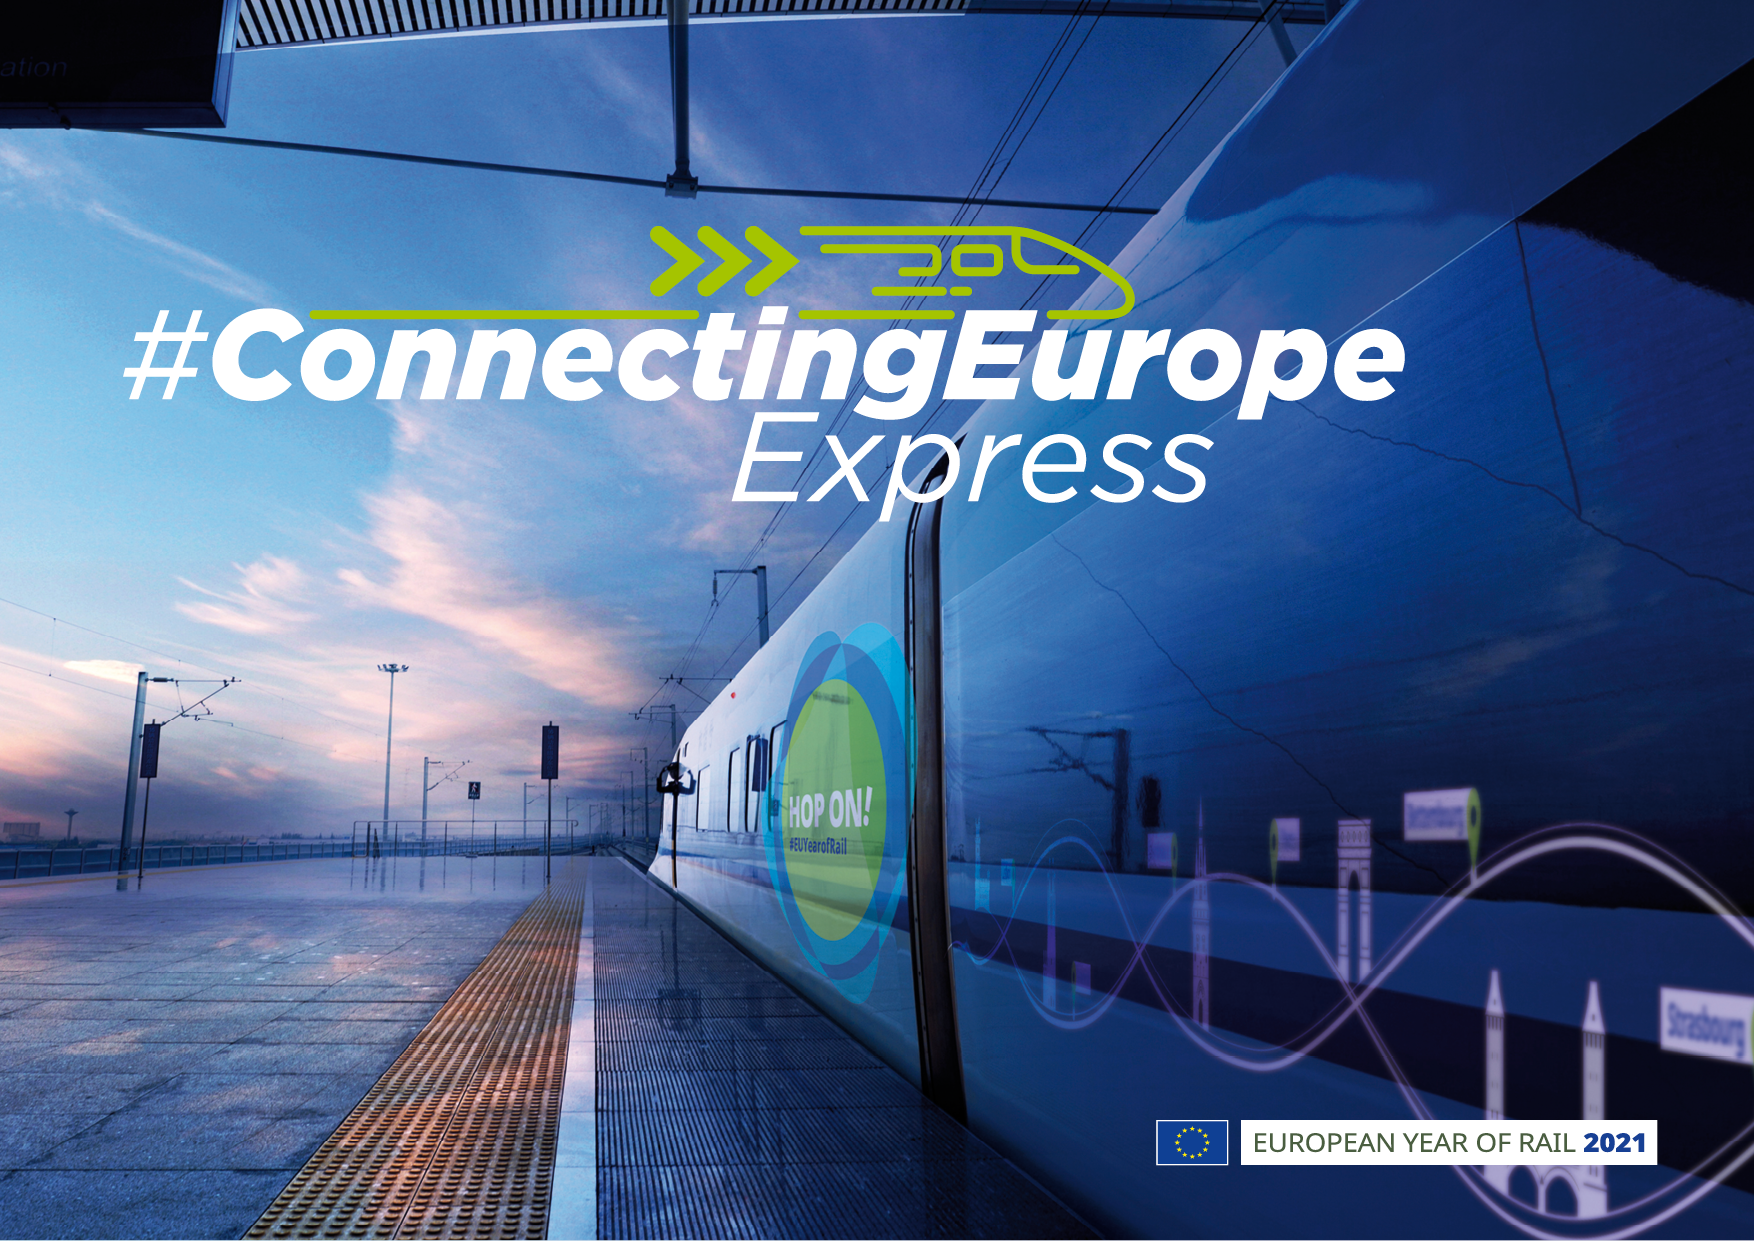 The Connecting Europe Express train traveled to more than 100 European cities